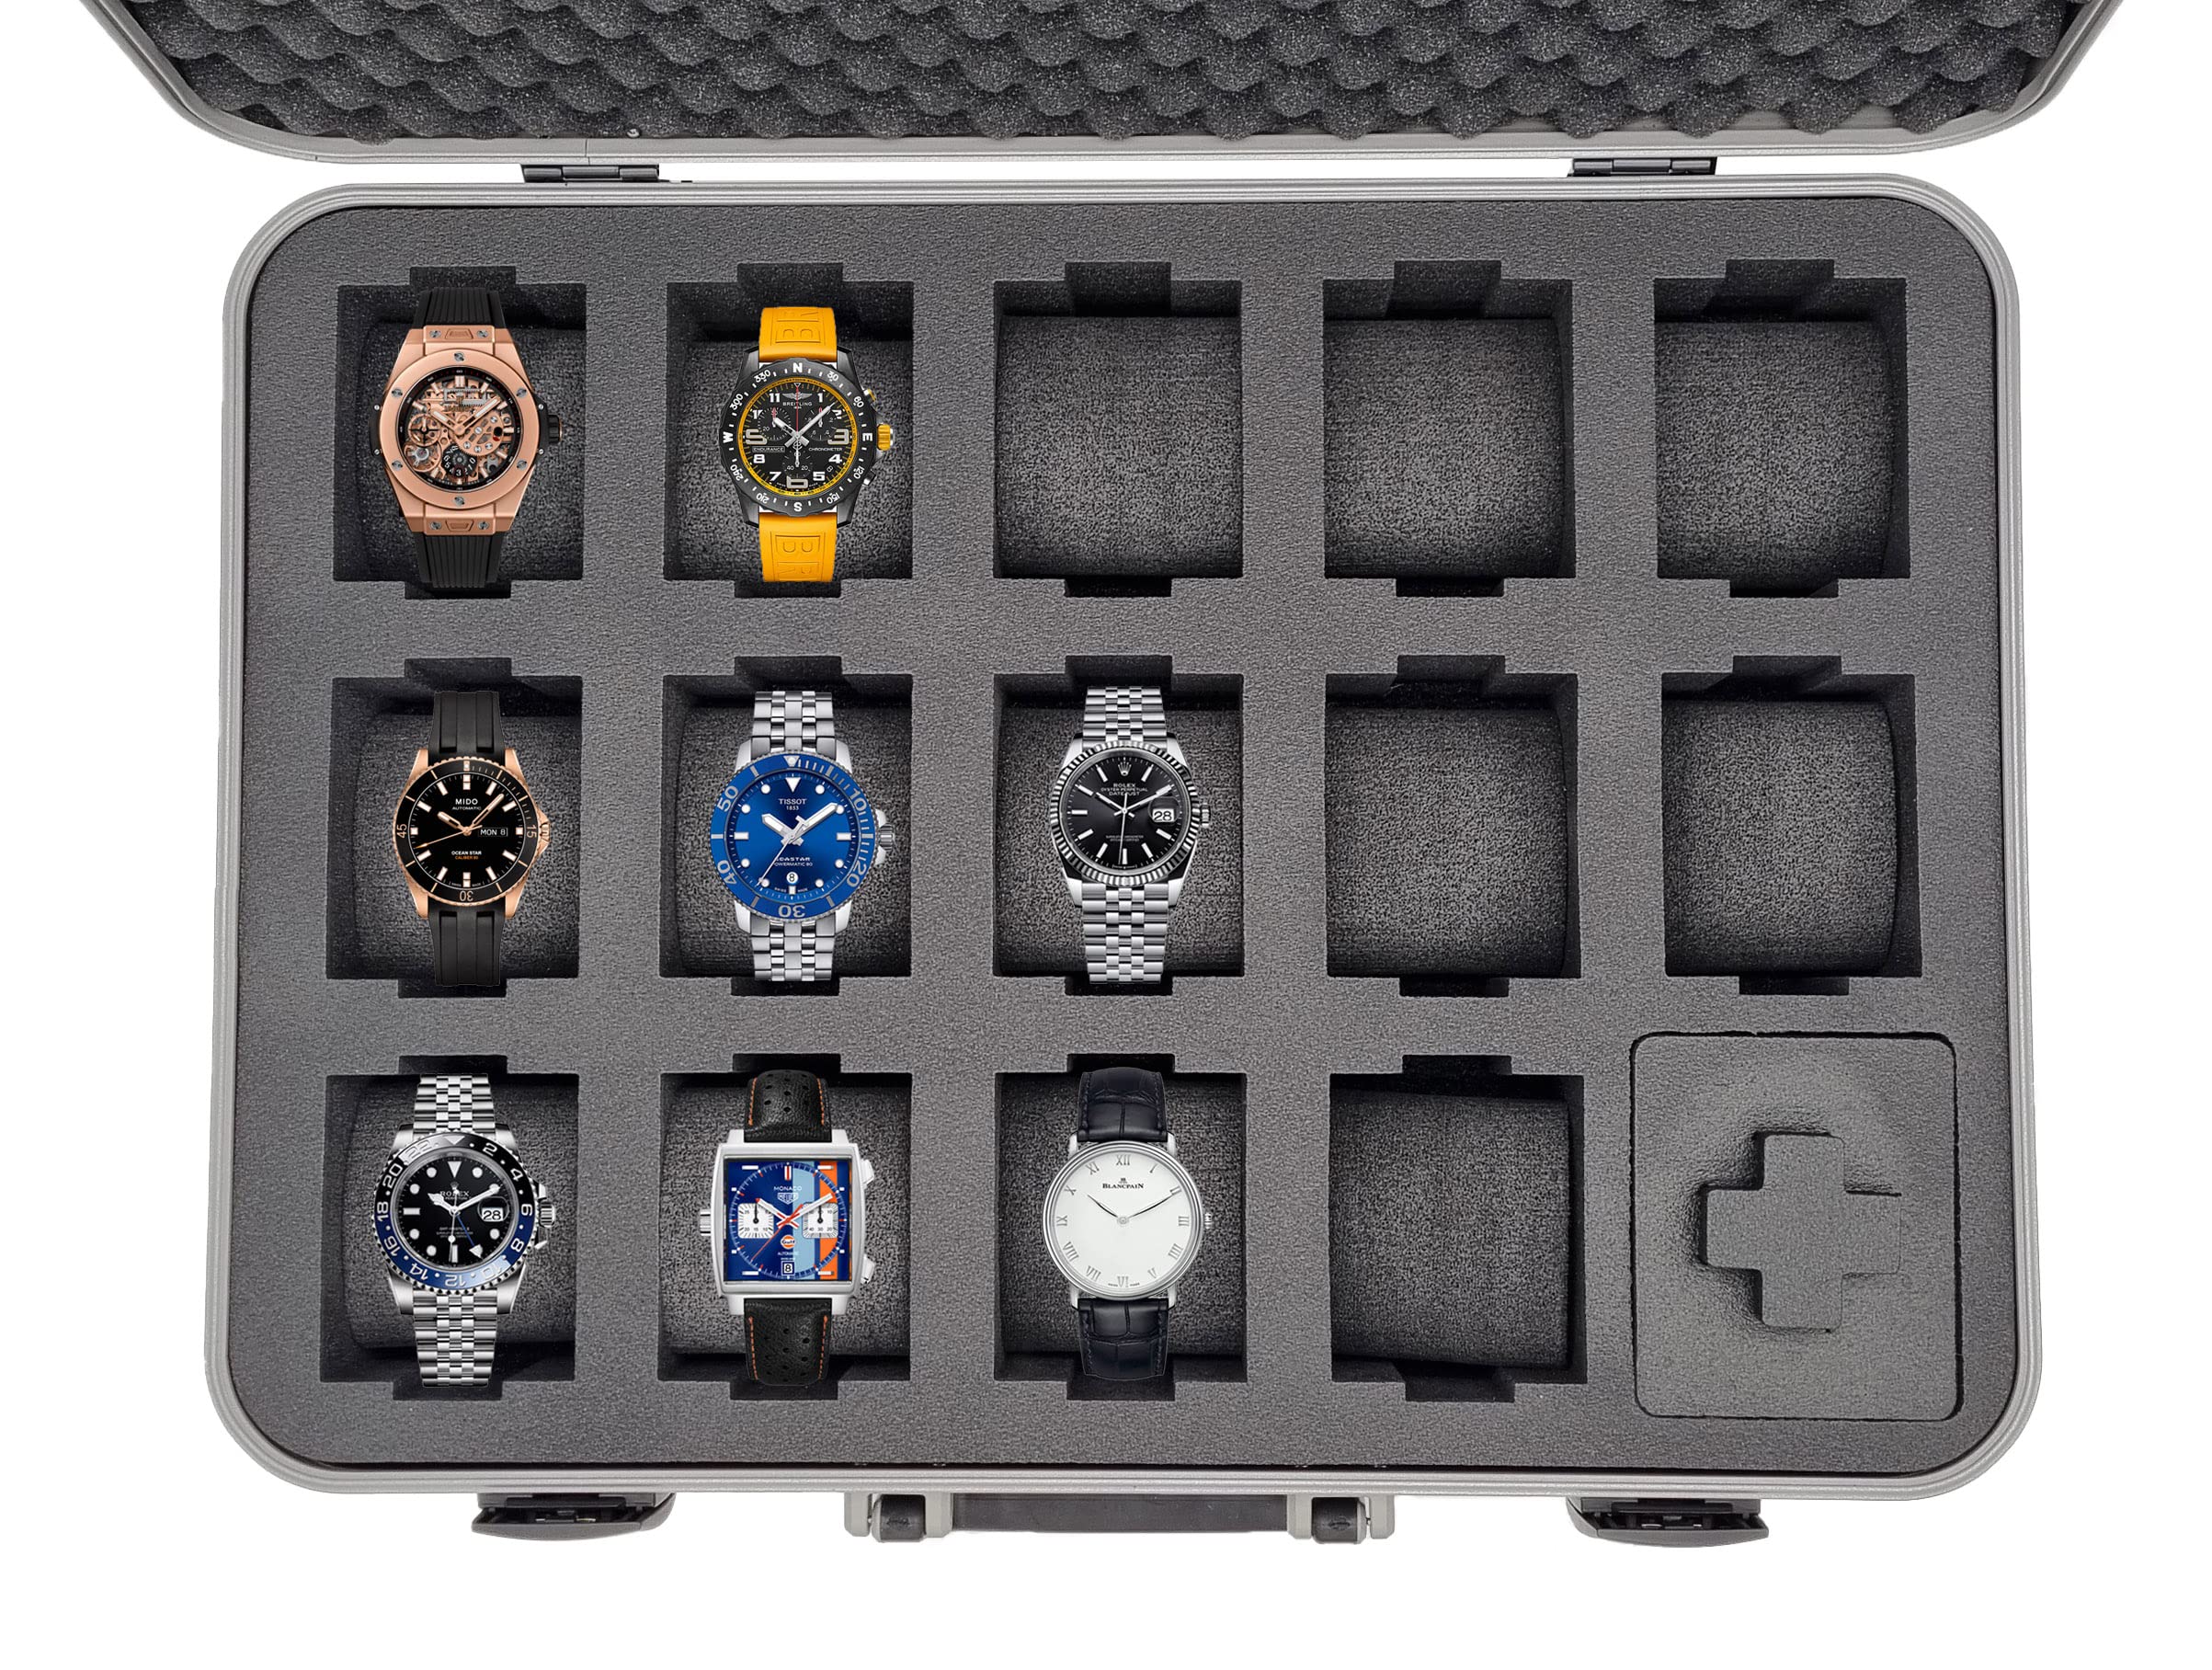 mc-cases® Watch Case Transport Case for up to 14 Watches - Luxury Line - Aluminium Case - Handmade…